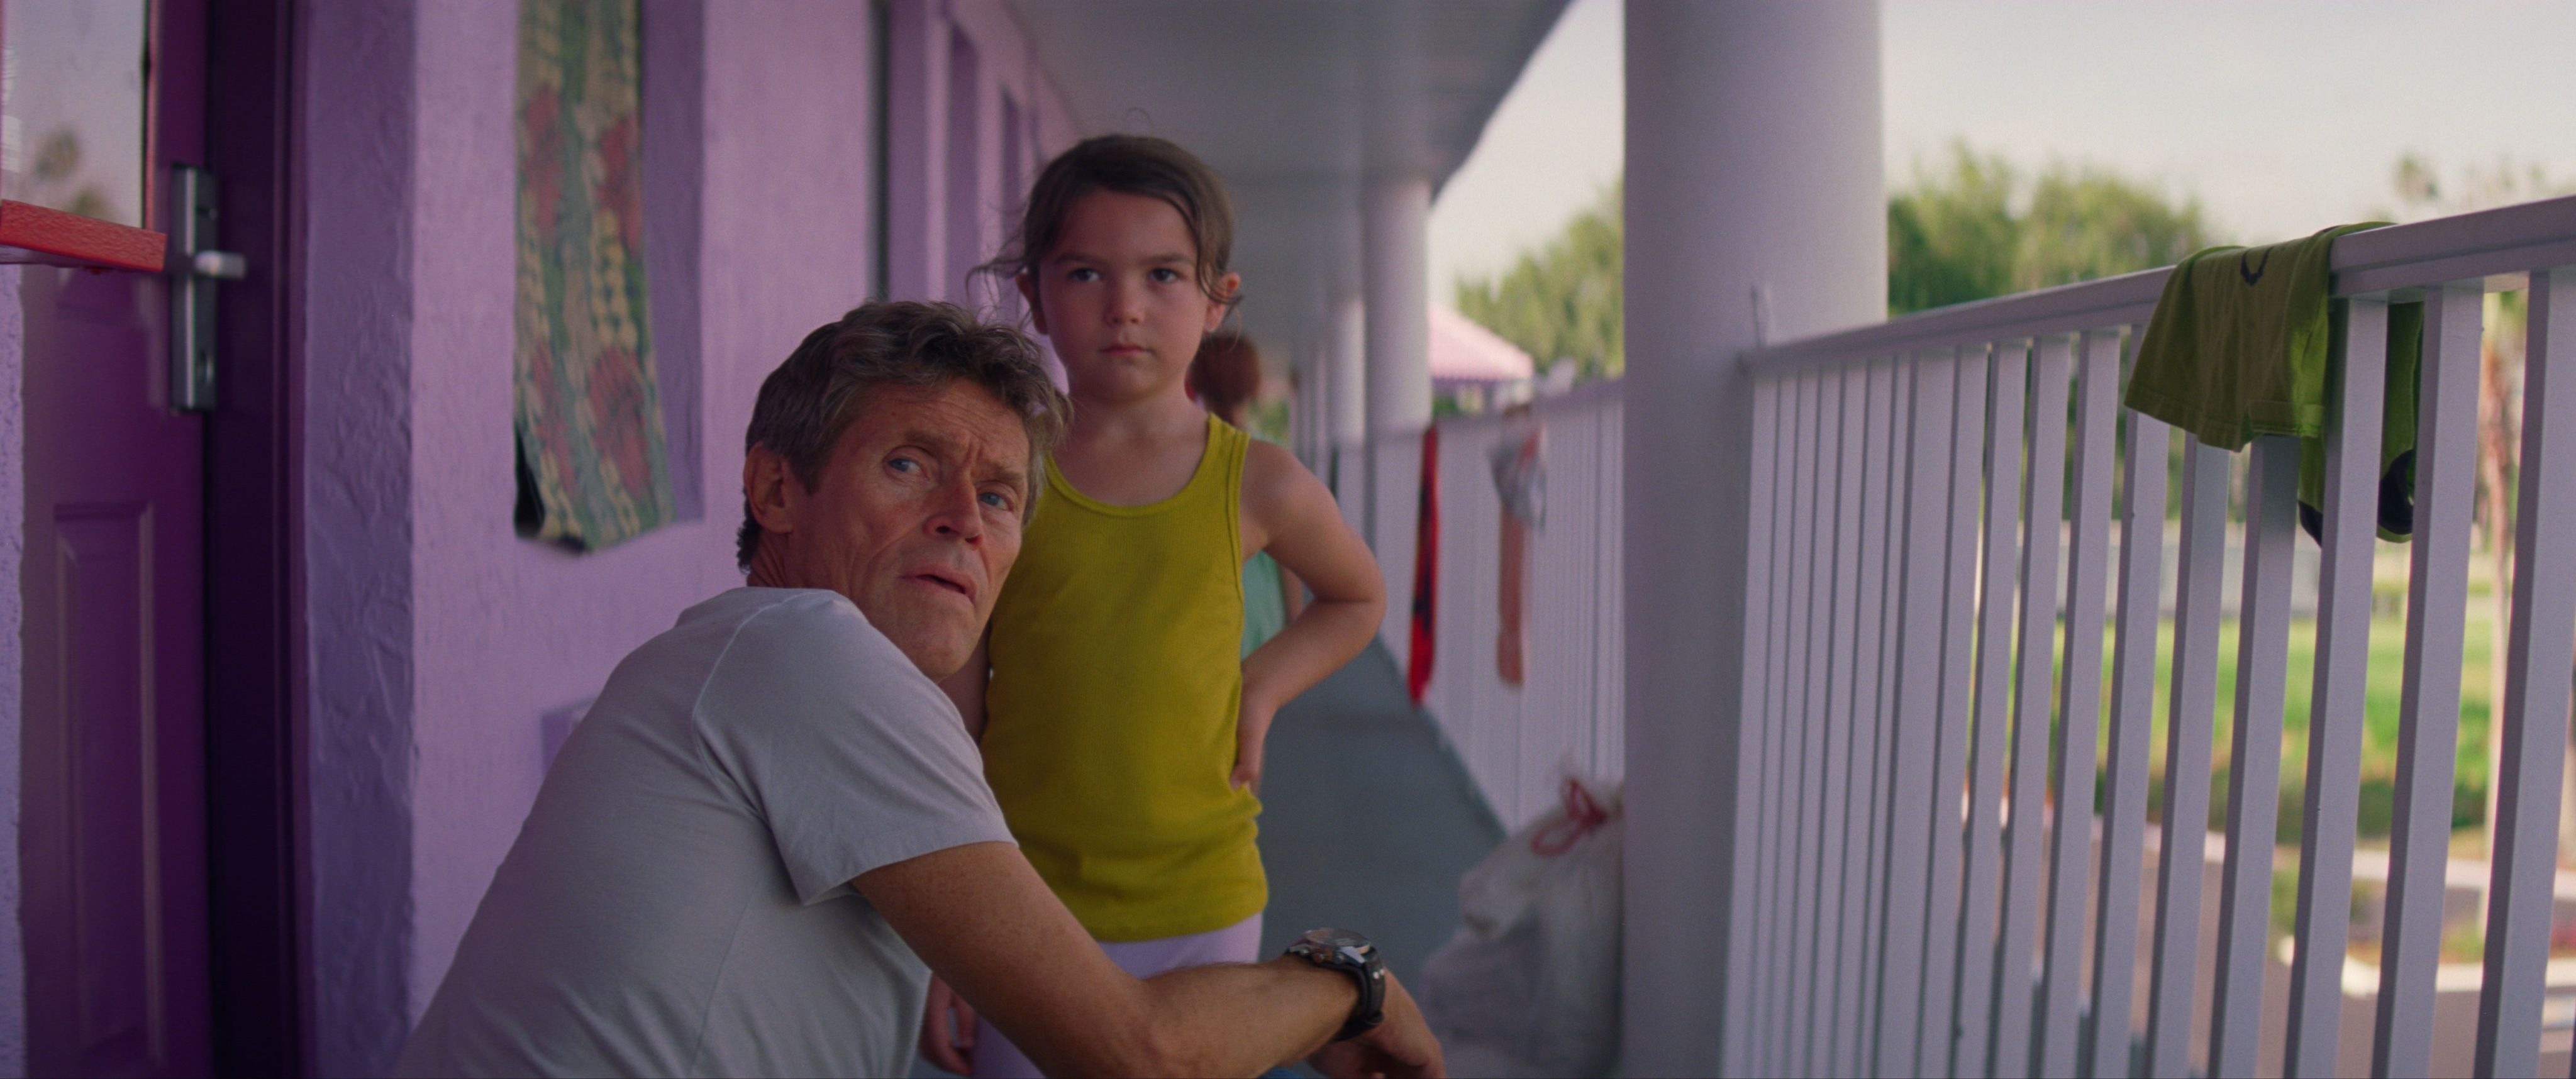 Image result for the florida project eating